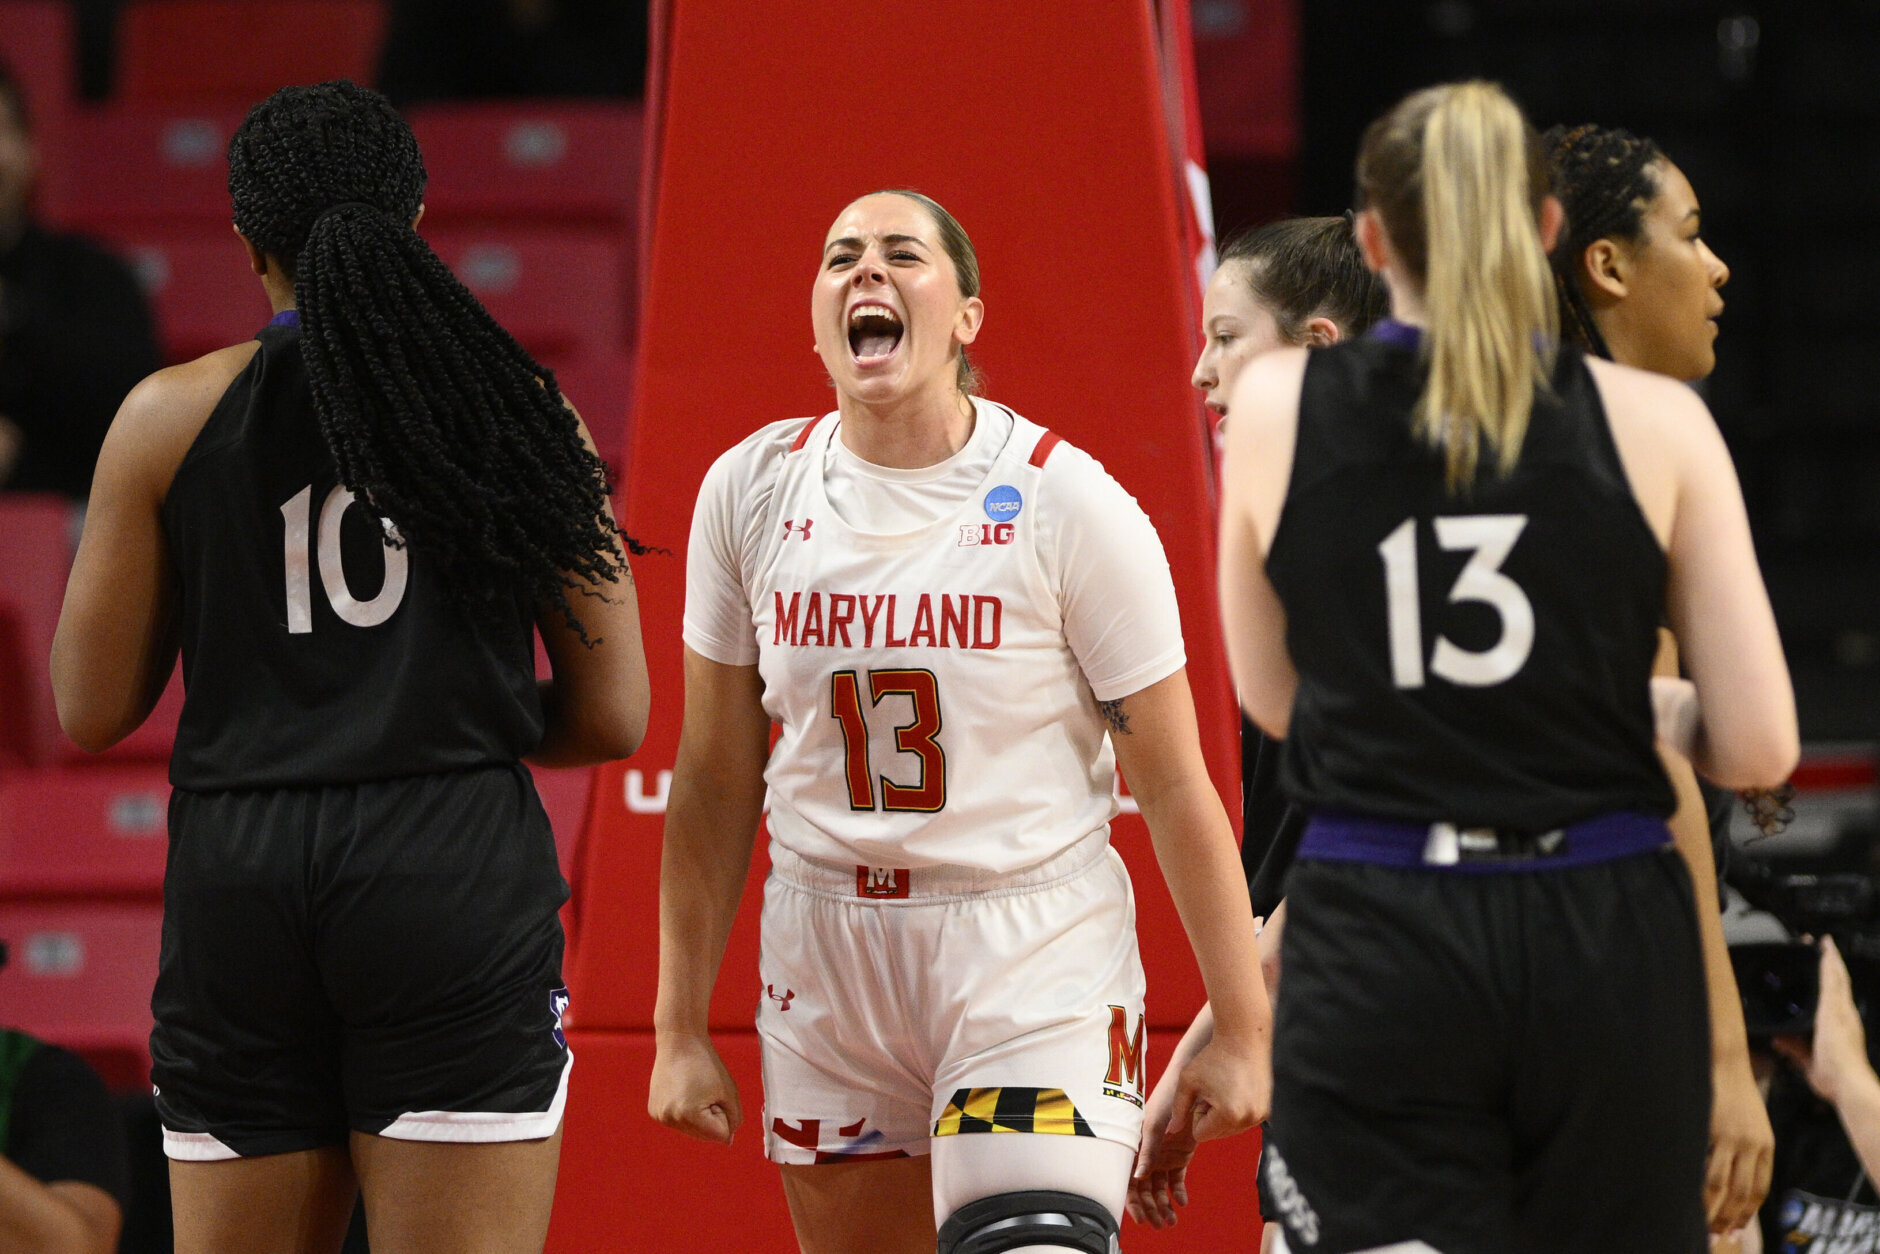 Maryland guard Faith Masonius, center, reacts next to Holy Cross guard Bronagh Power-Cassidy, right, and forward Janelle Allen (10) in the first half of a first-round college basketball game in the NCAA Tournament, Friday, March 17, 2023, in College Park, Md. (AP Photo/Nick Wass)